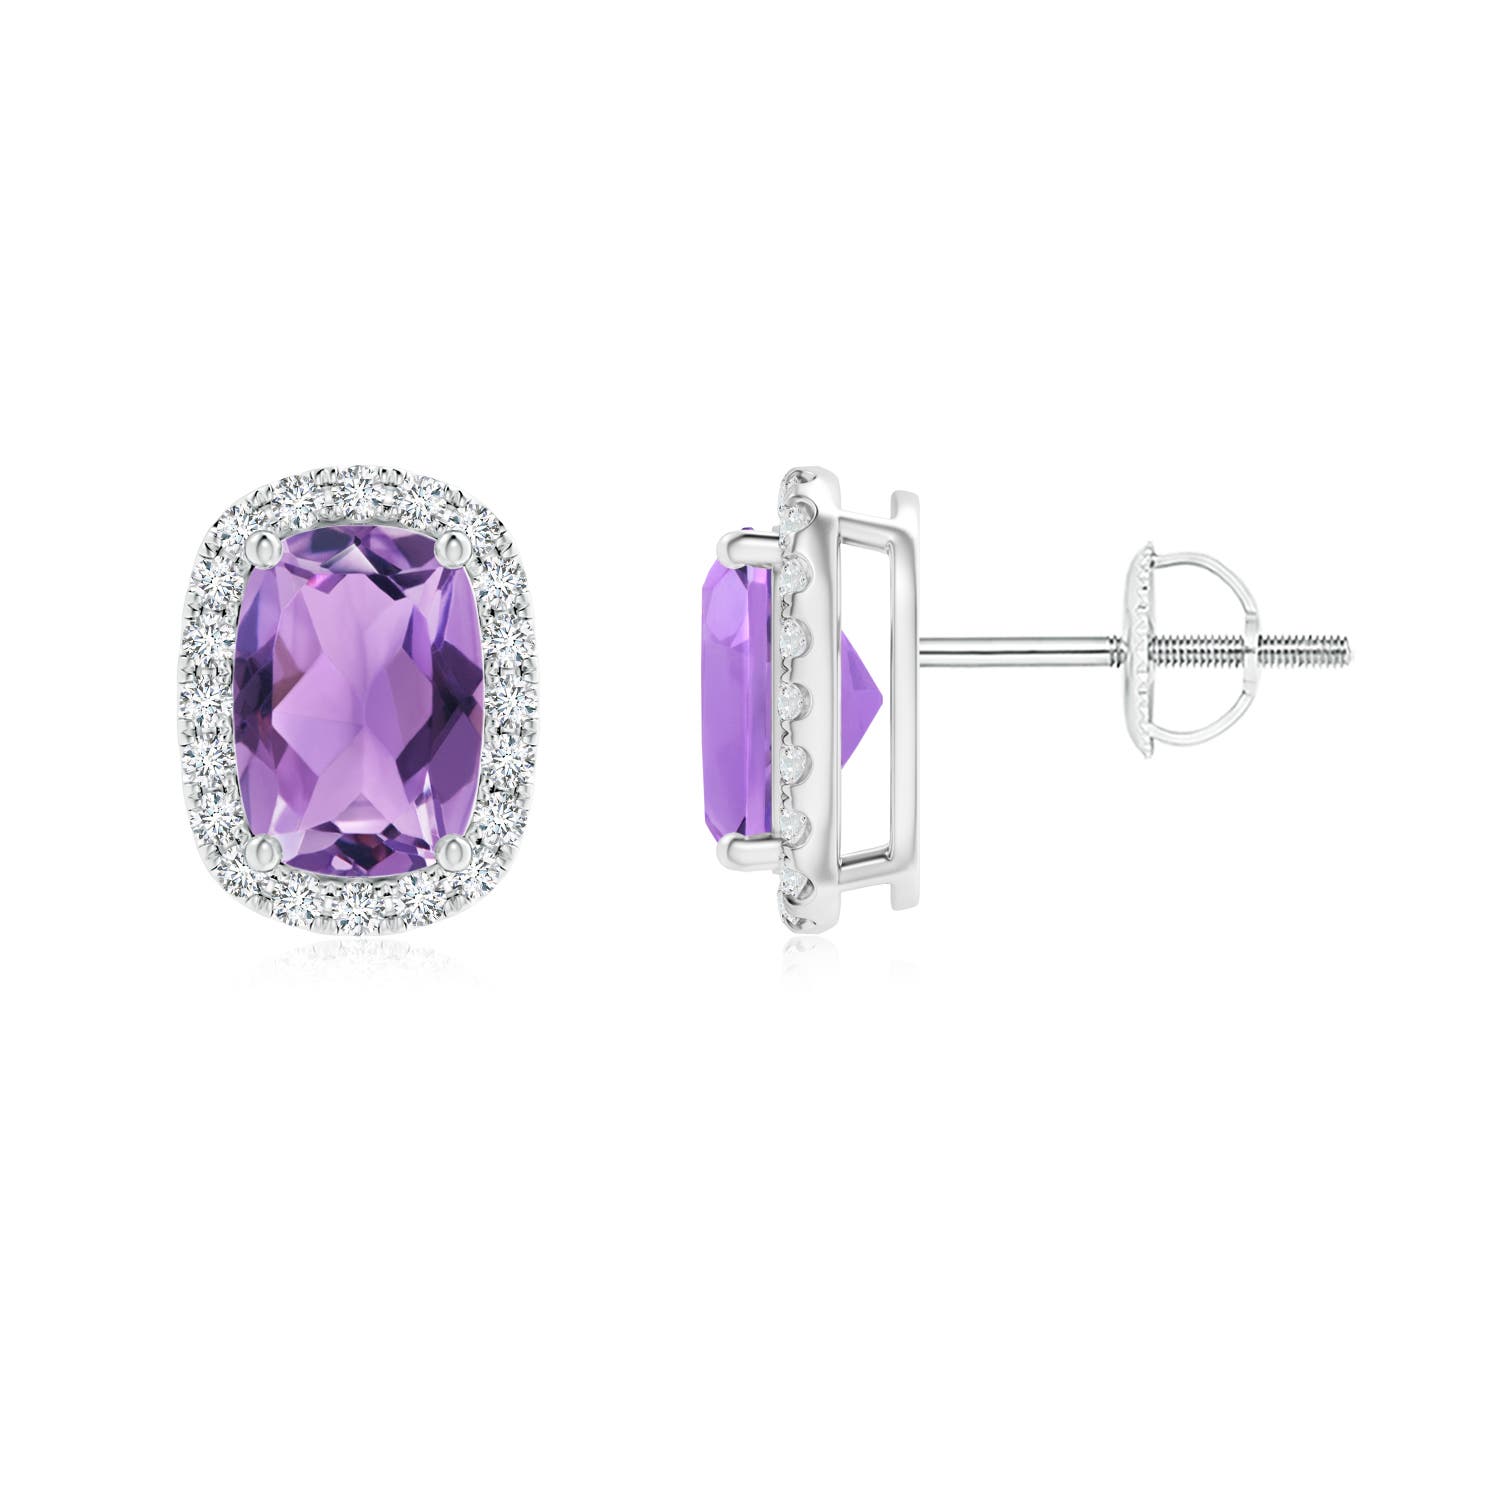 A - Amethyst / 1.64 CT / 14 KT White Gold